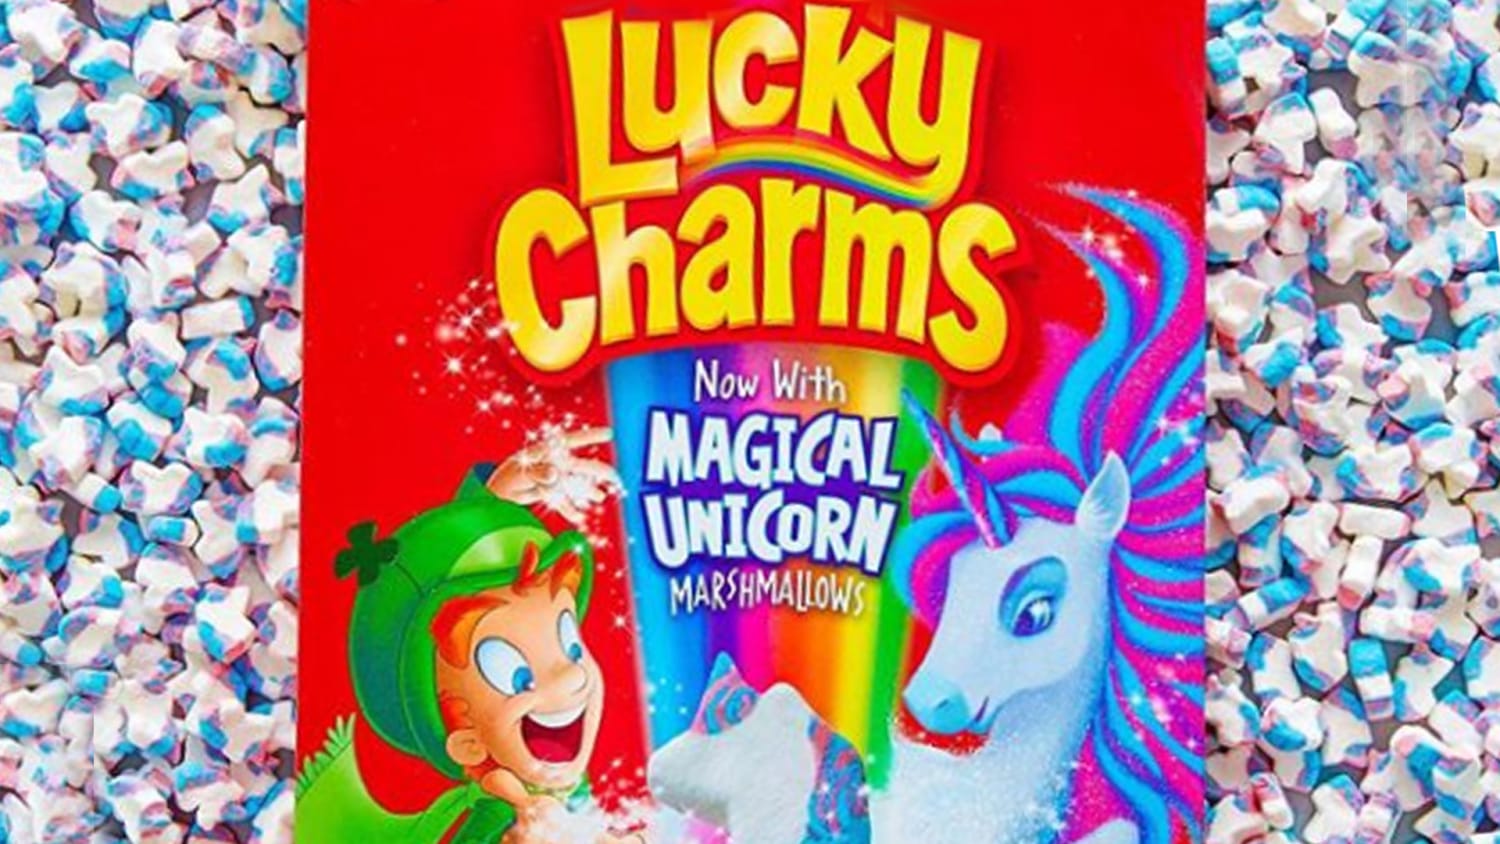 Lucky Charms adds unicorn marshmallow to its roster.